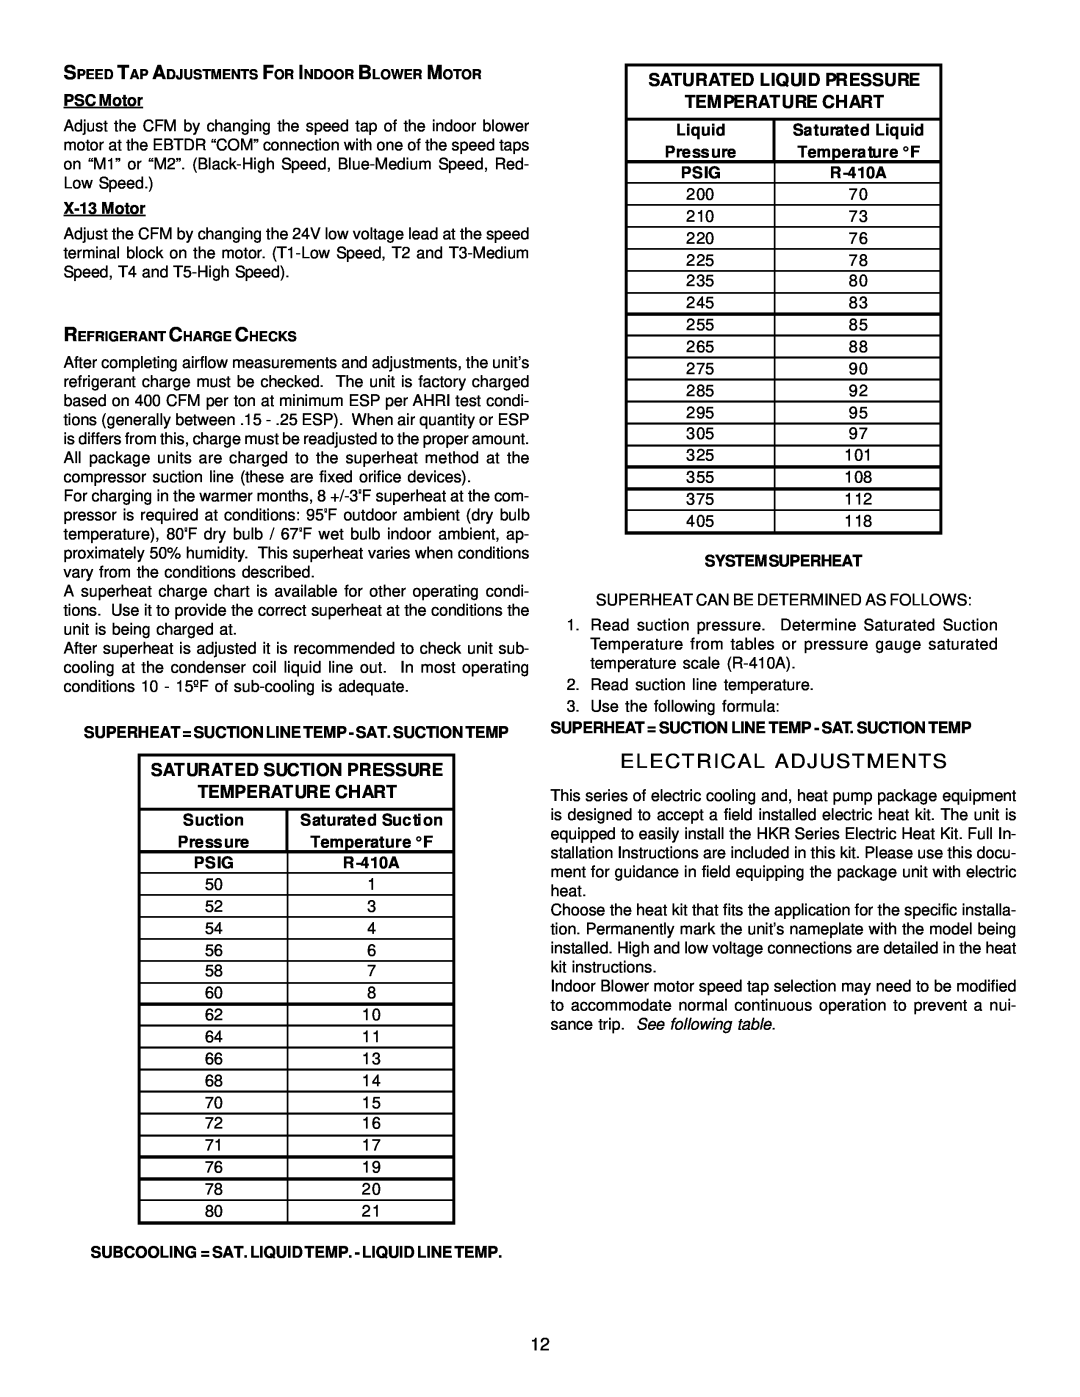 Goodman Mfg IO - 395 specifications Electrical Adjustments, Saturated Suction Pressure Temperature Chart 